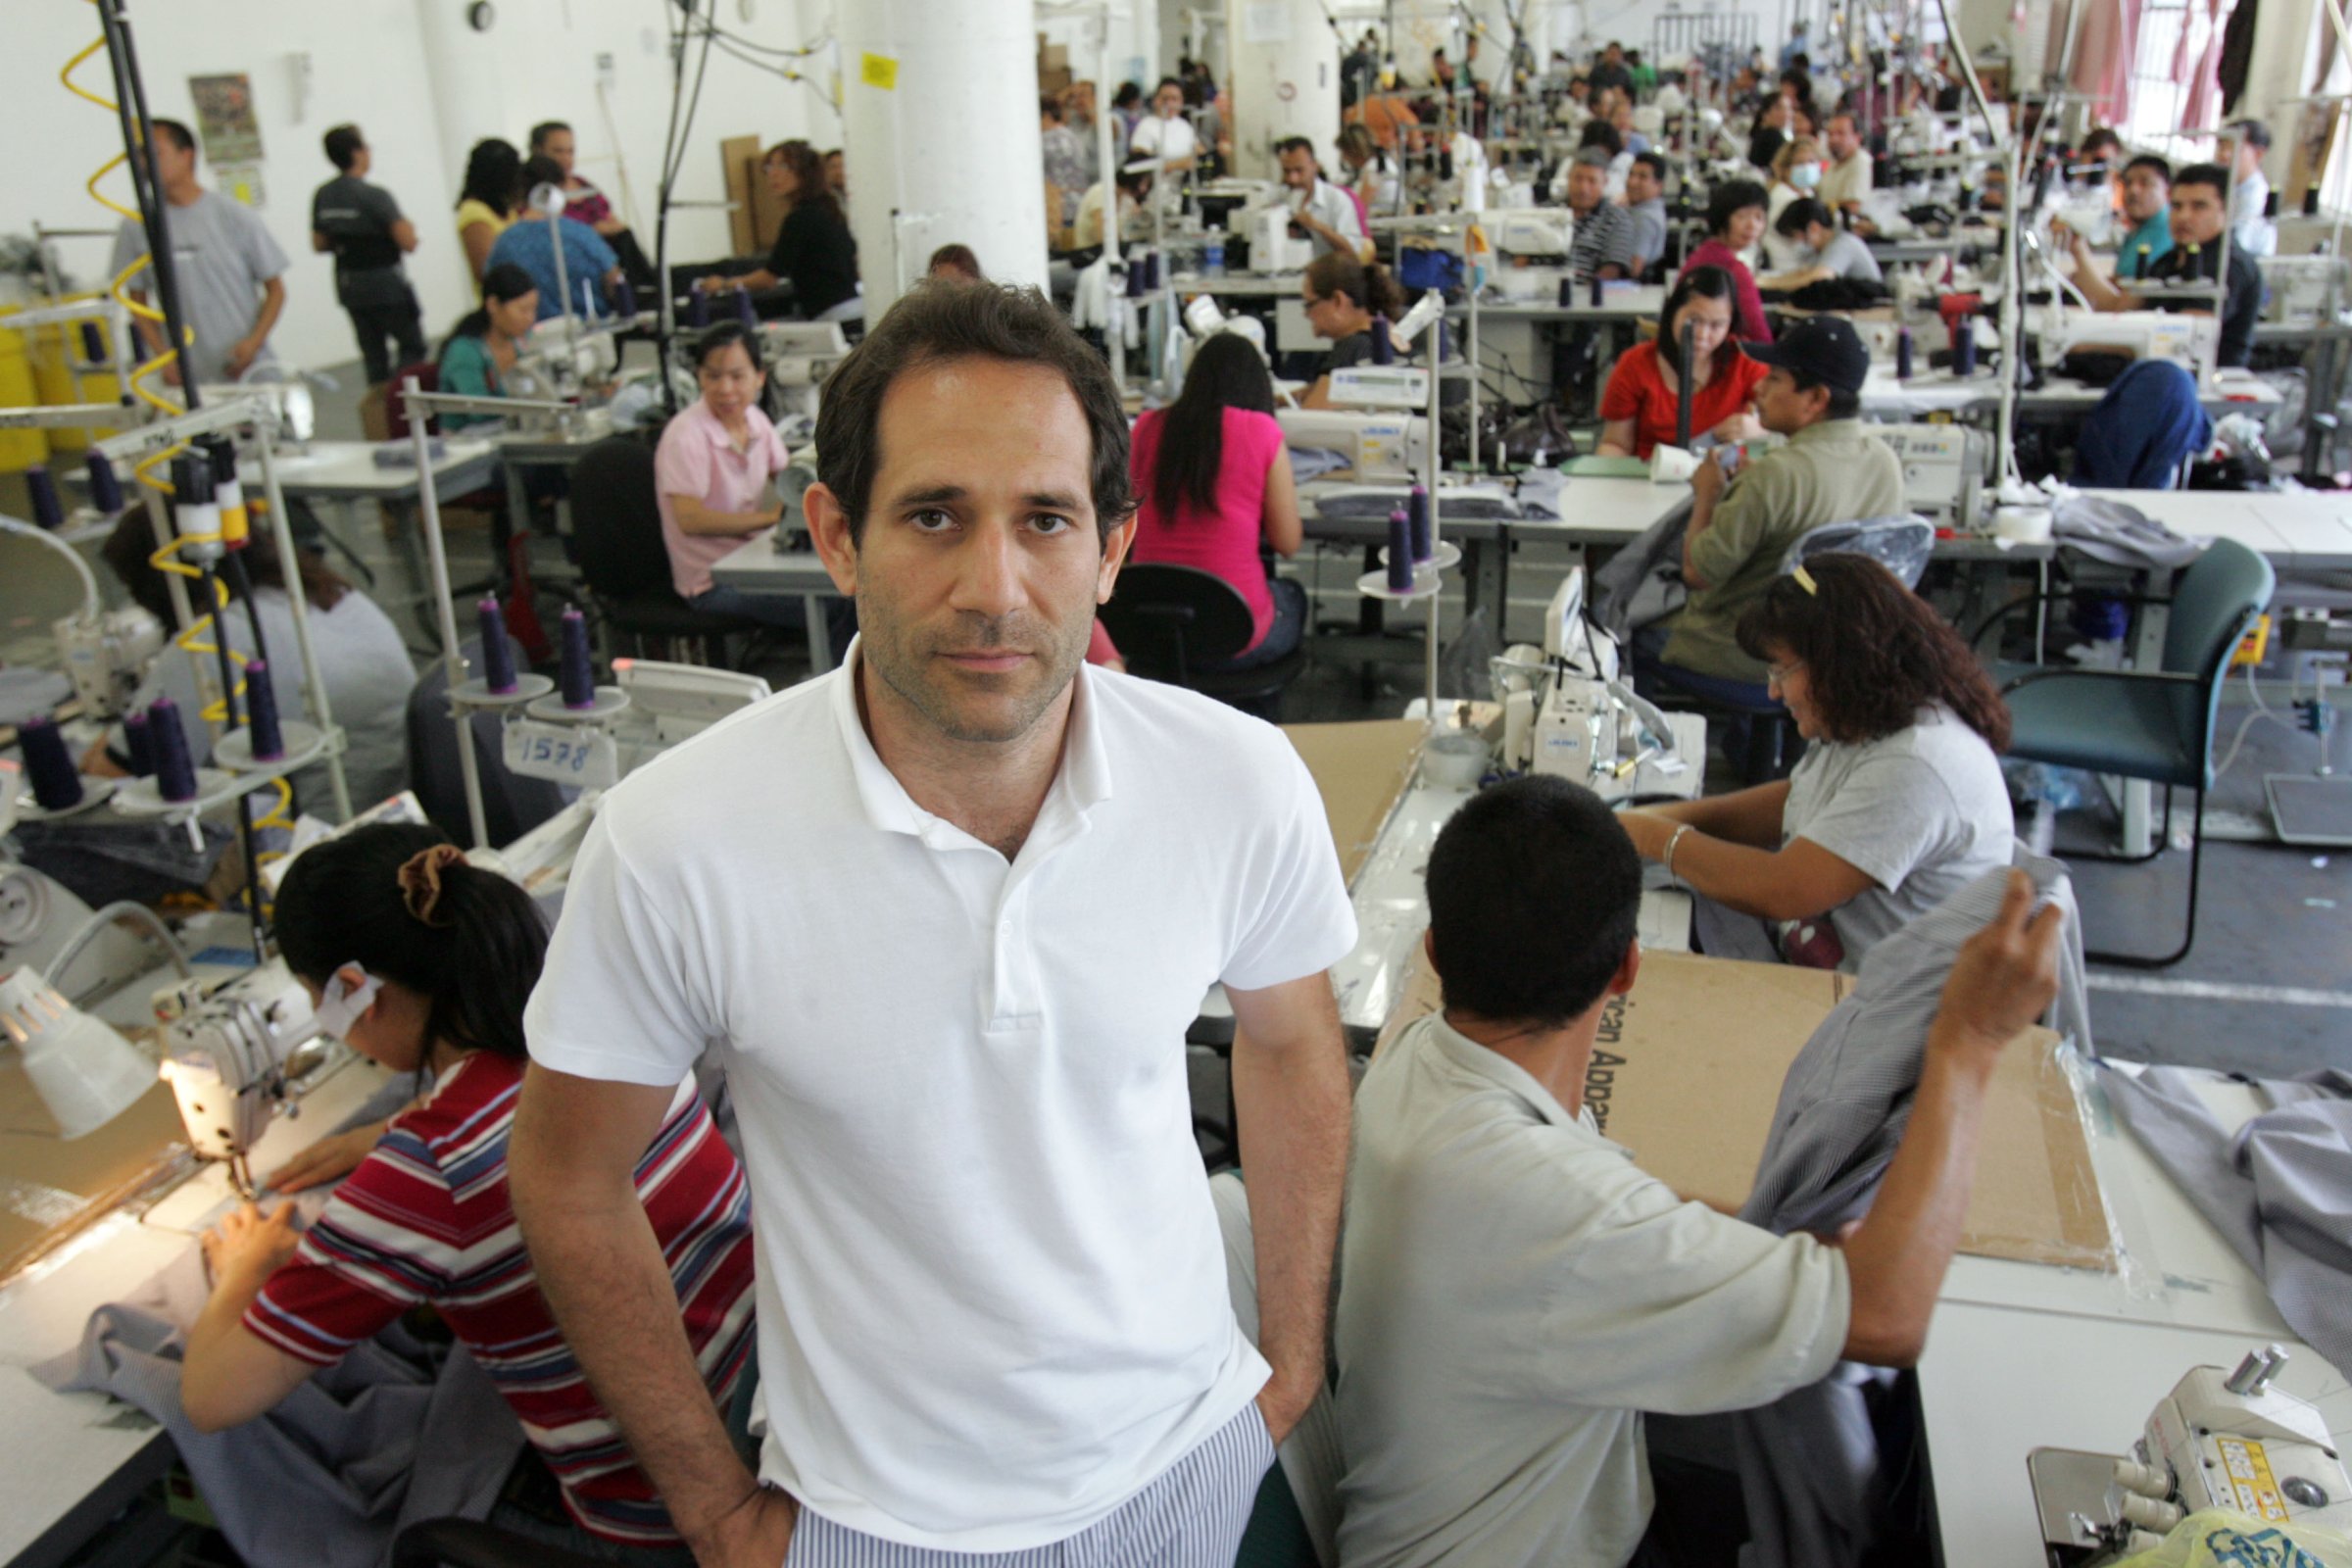 American Apparel ousted its CEO, Dov Charney, who has been the target of lawsuits alleging inappropriate sexual conduct with female employees in Los Angeles, California on June 19, 2014